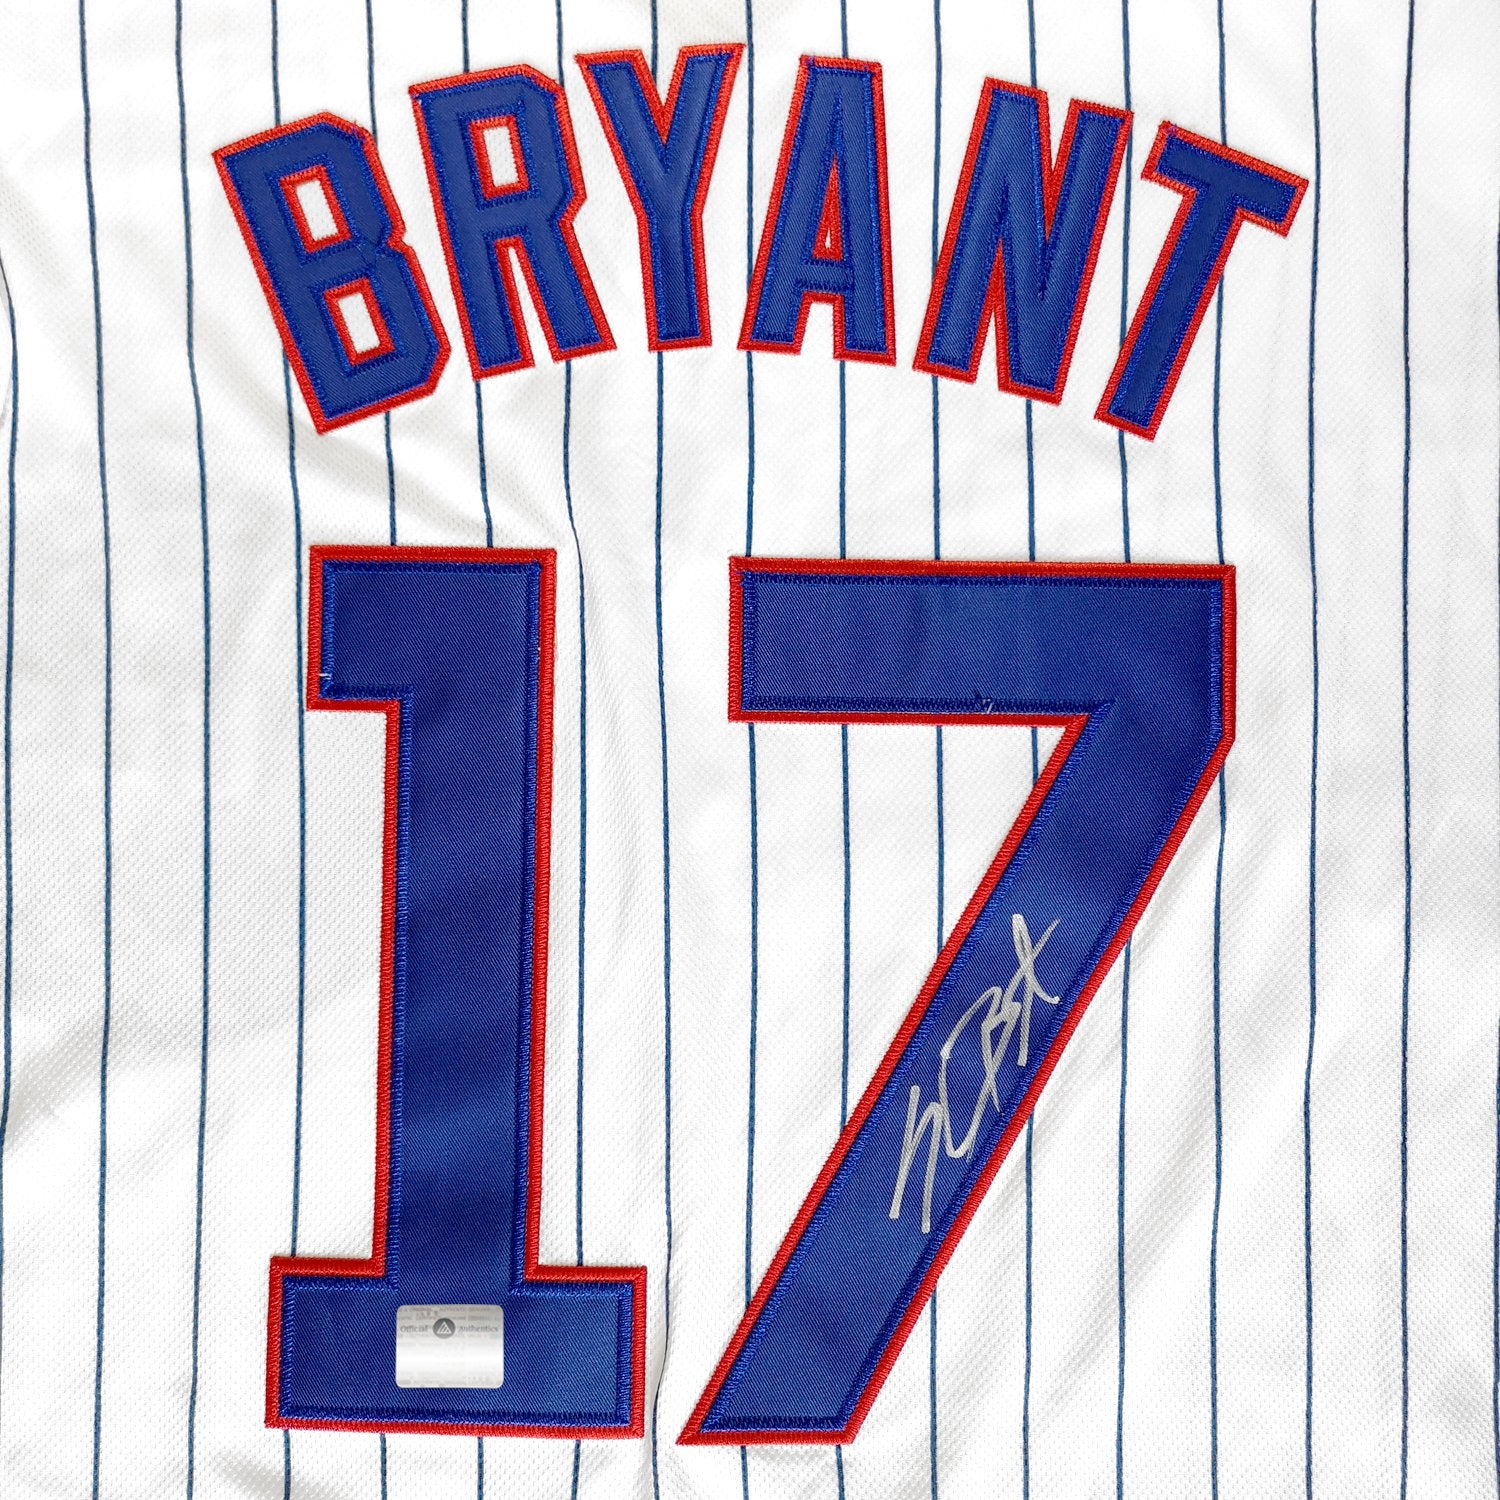 personalized cubs world series jersey